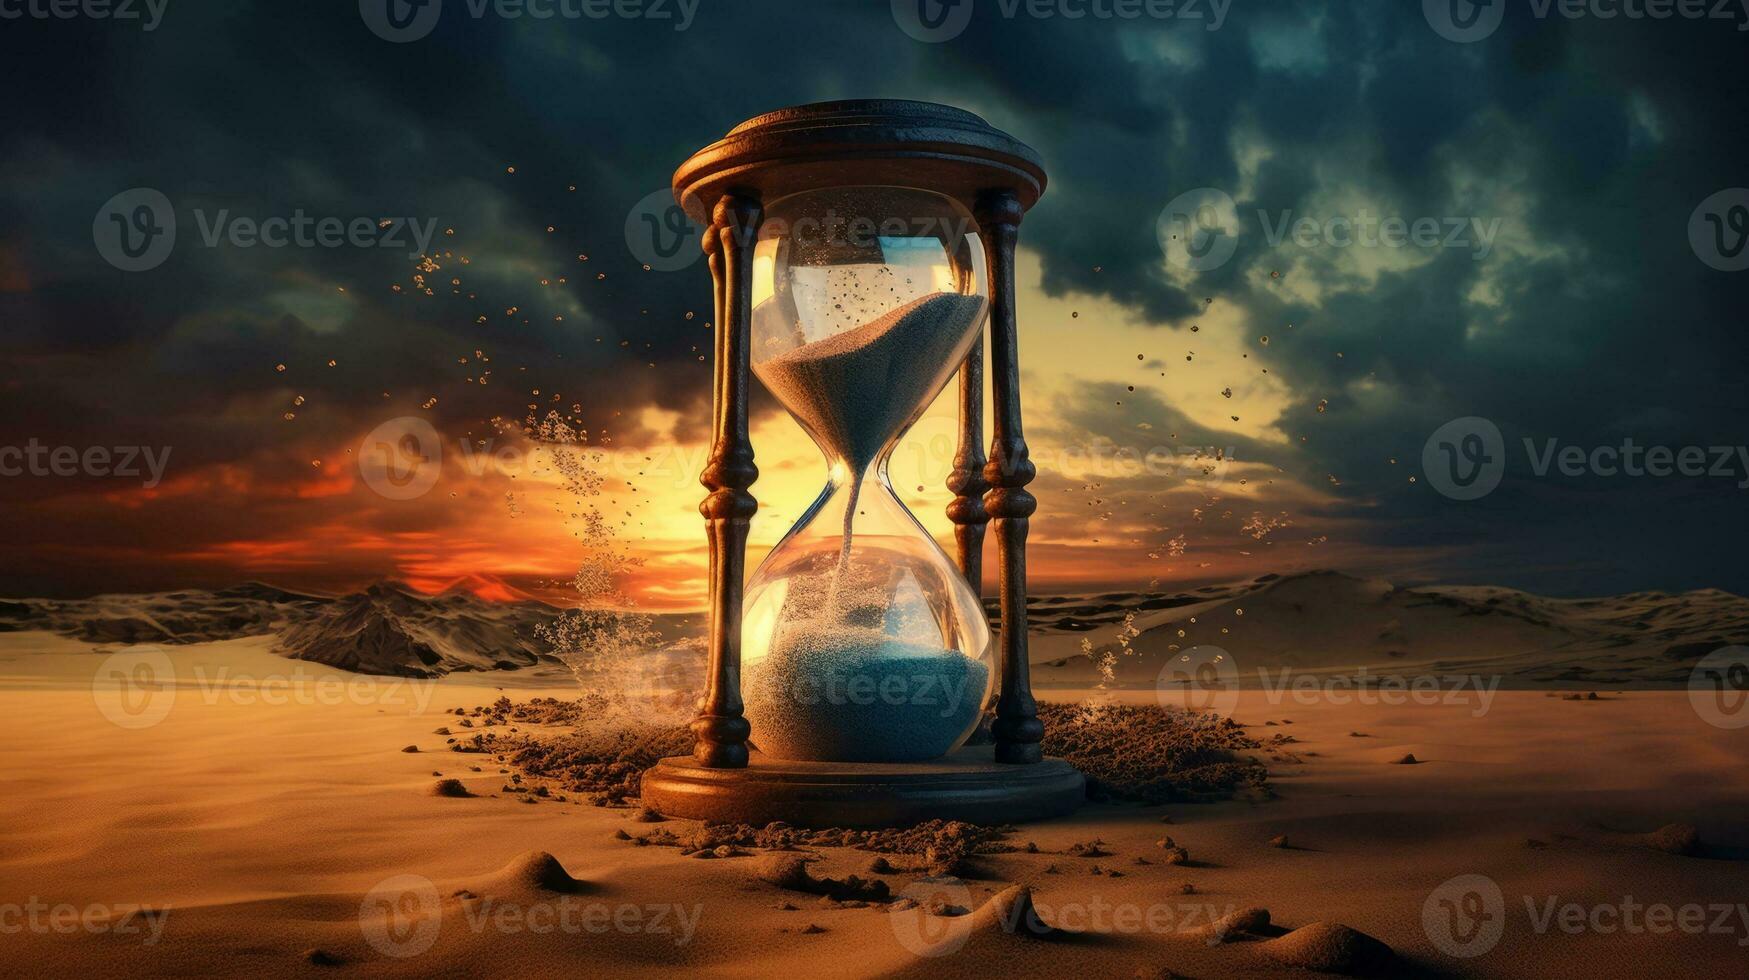 Realistic and surreal image of an hourglass in a desert scene photo